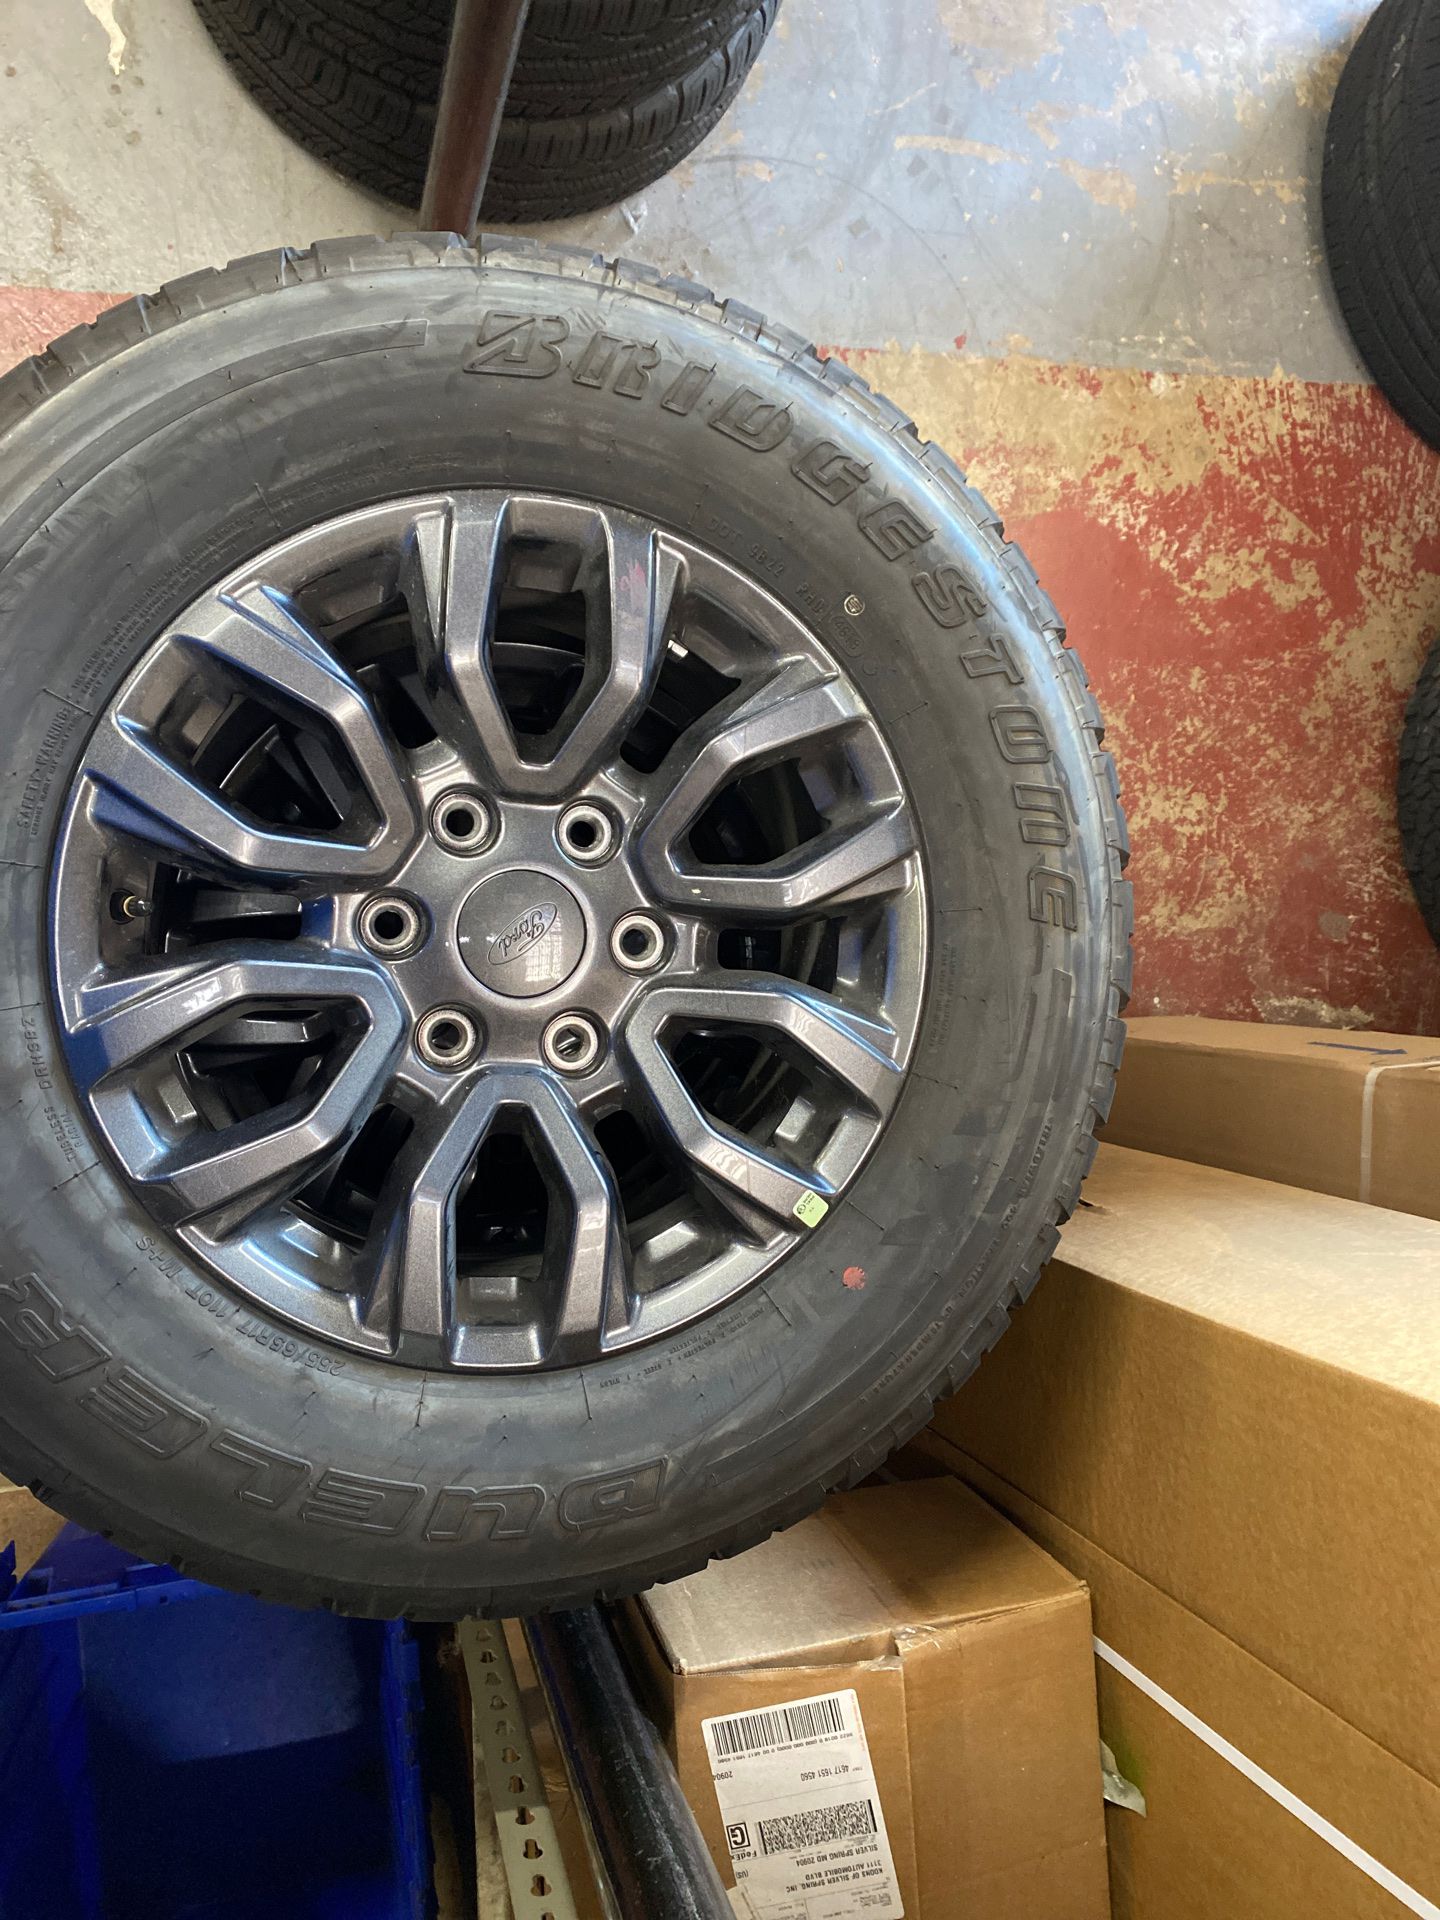 2019 New ford ranger wheels and tires